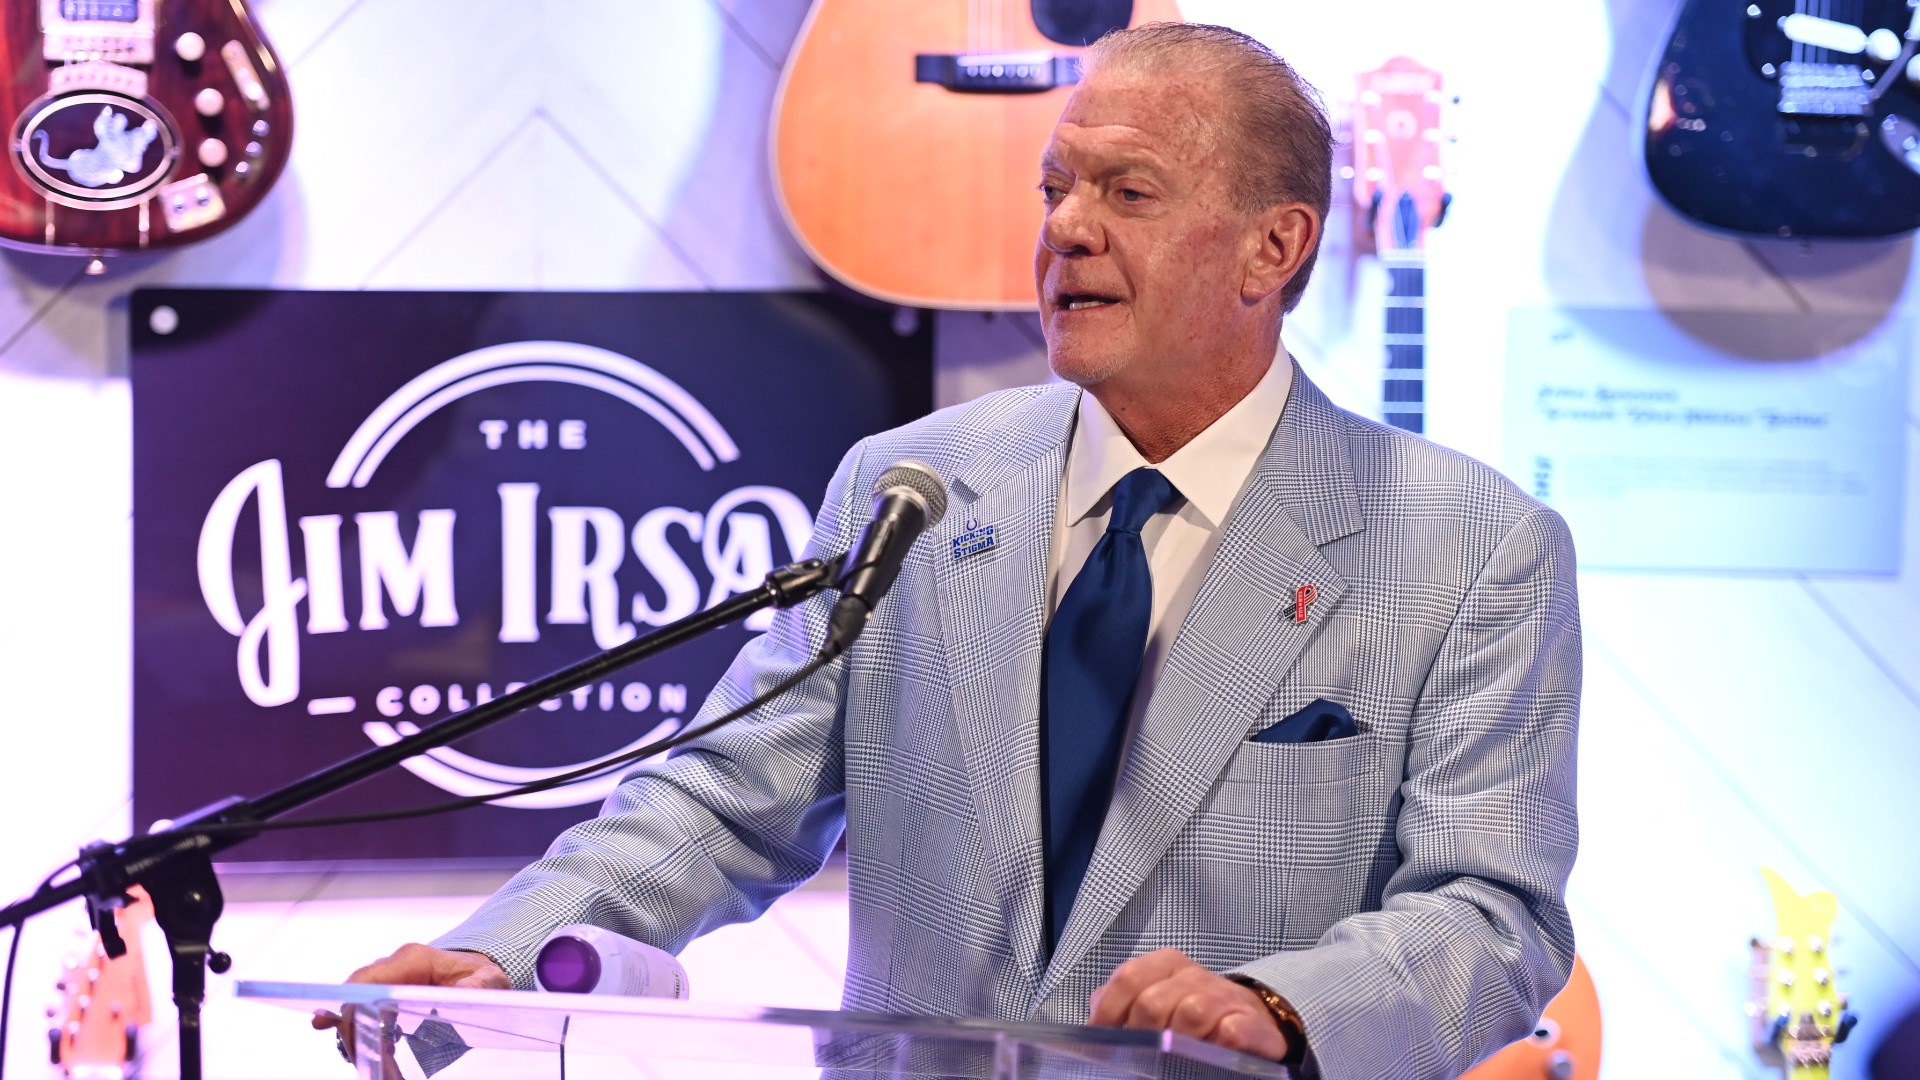 "The stigma surrounding mental health is a matter of life and death, and we must do everything possible to lessen that stigma," said Colts owner Jim Irsay.